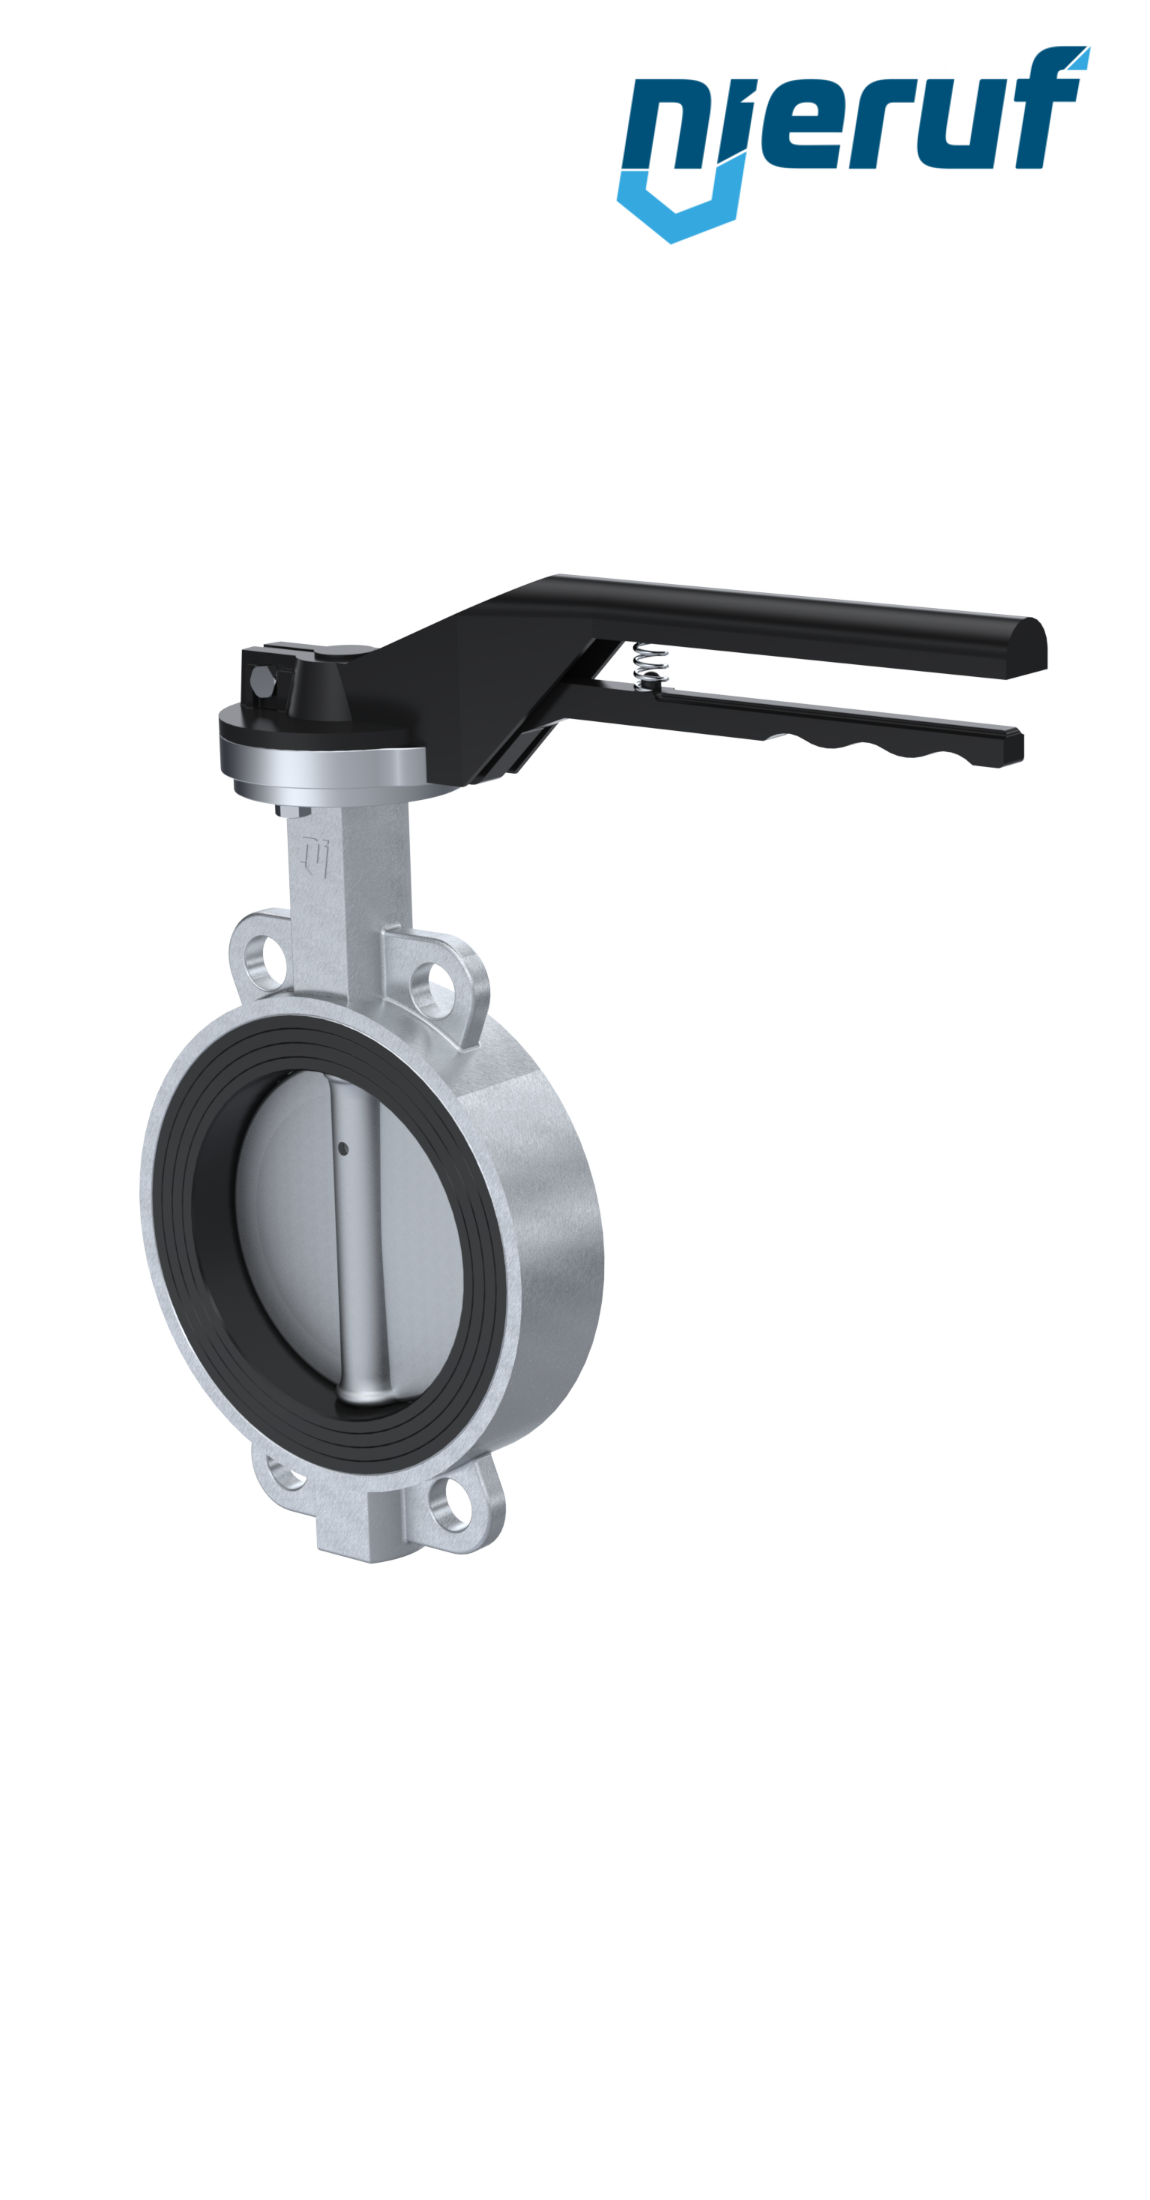 Butterfly-valve-stainless-steel DN40 PN16 AK08 EPDM notch lever